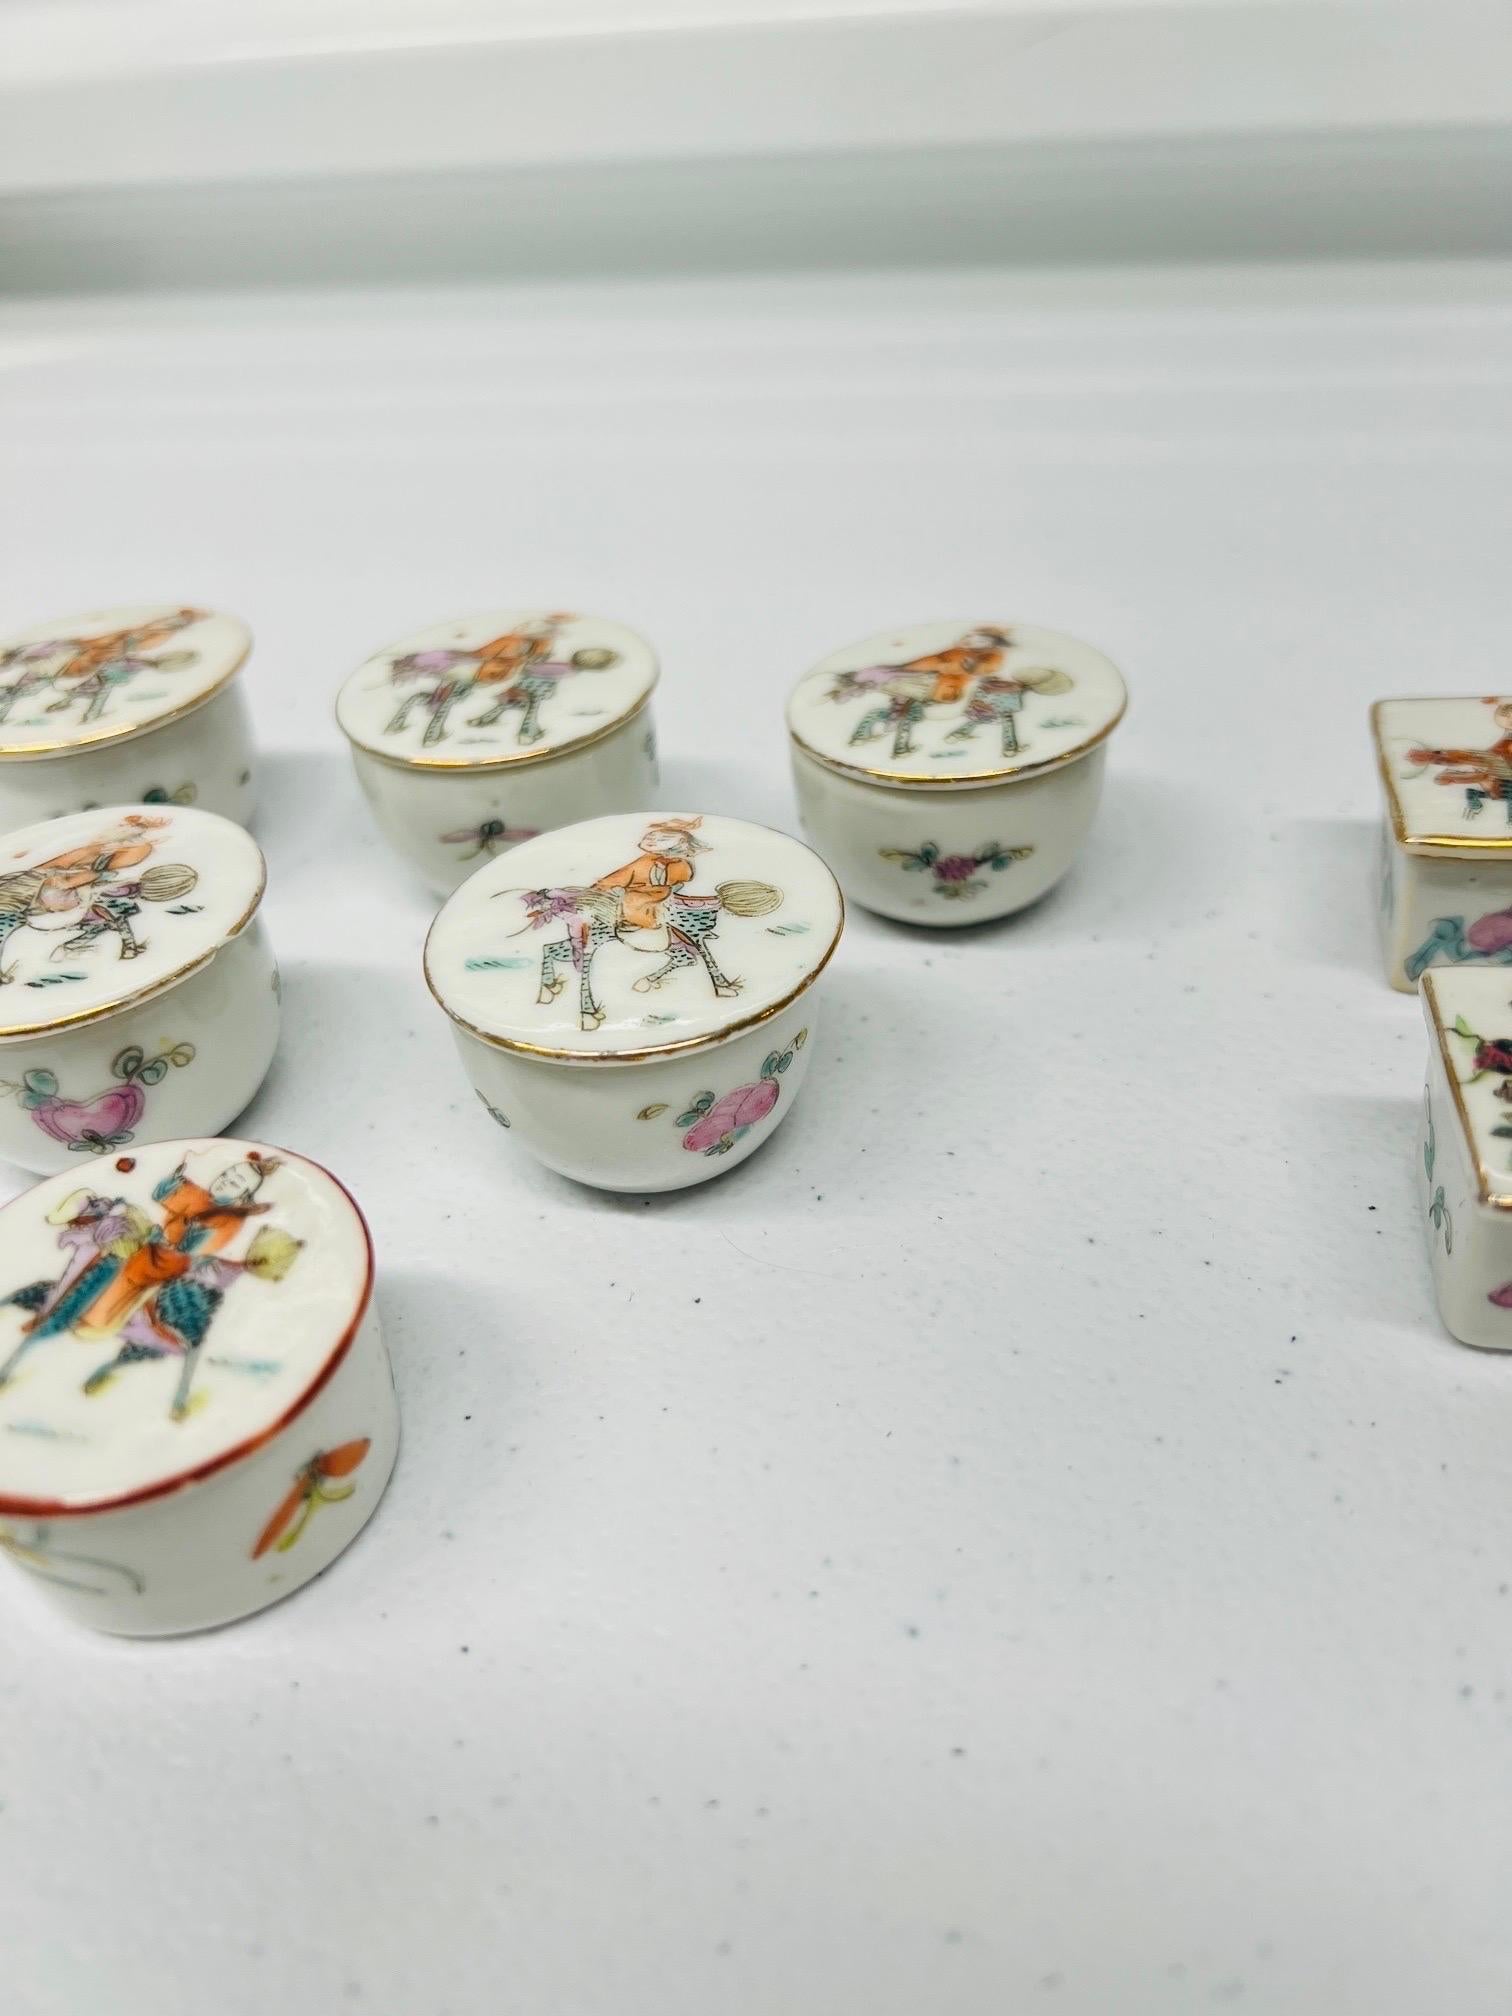 19th Century Qing Dynasty - 13 Antique Chinese Porcelain Enameled Salt Boxes For Sale